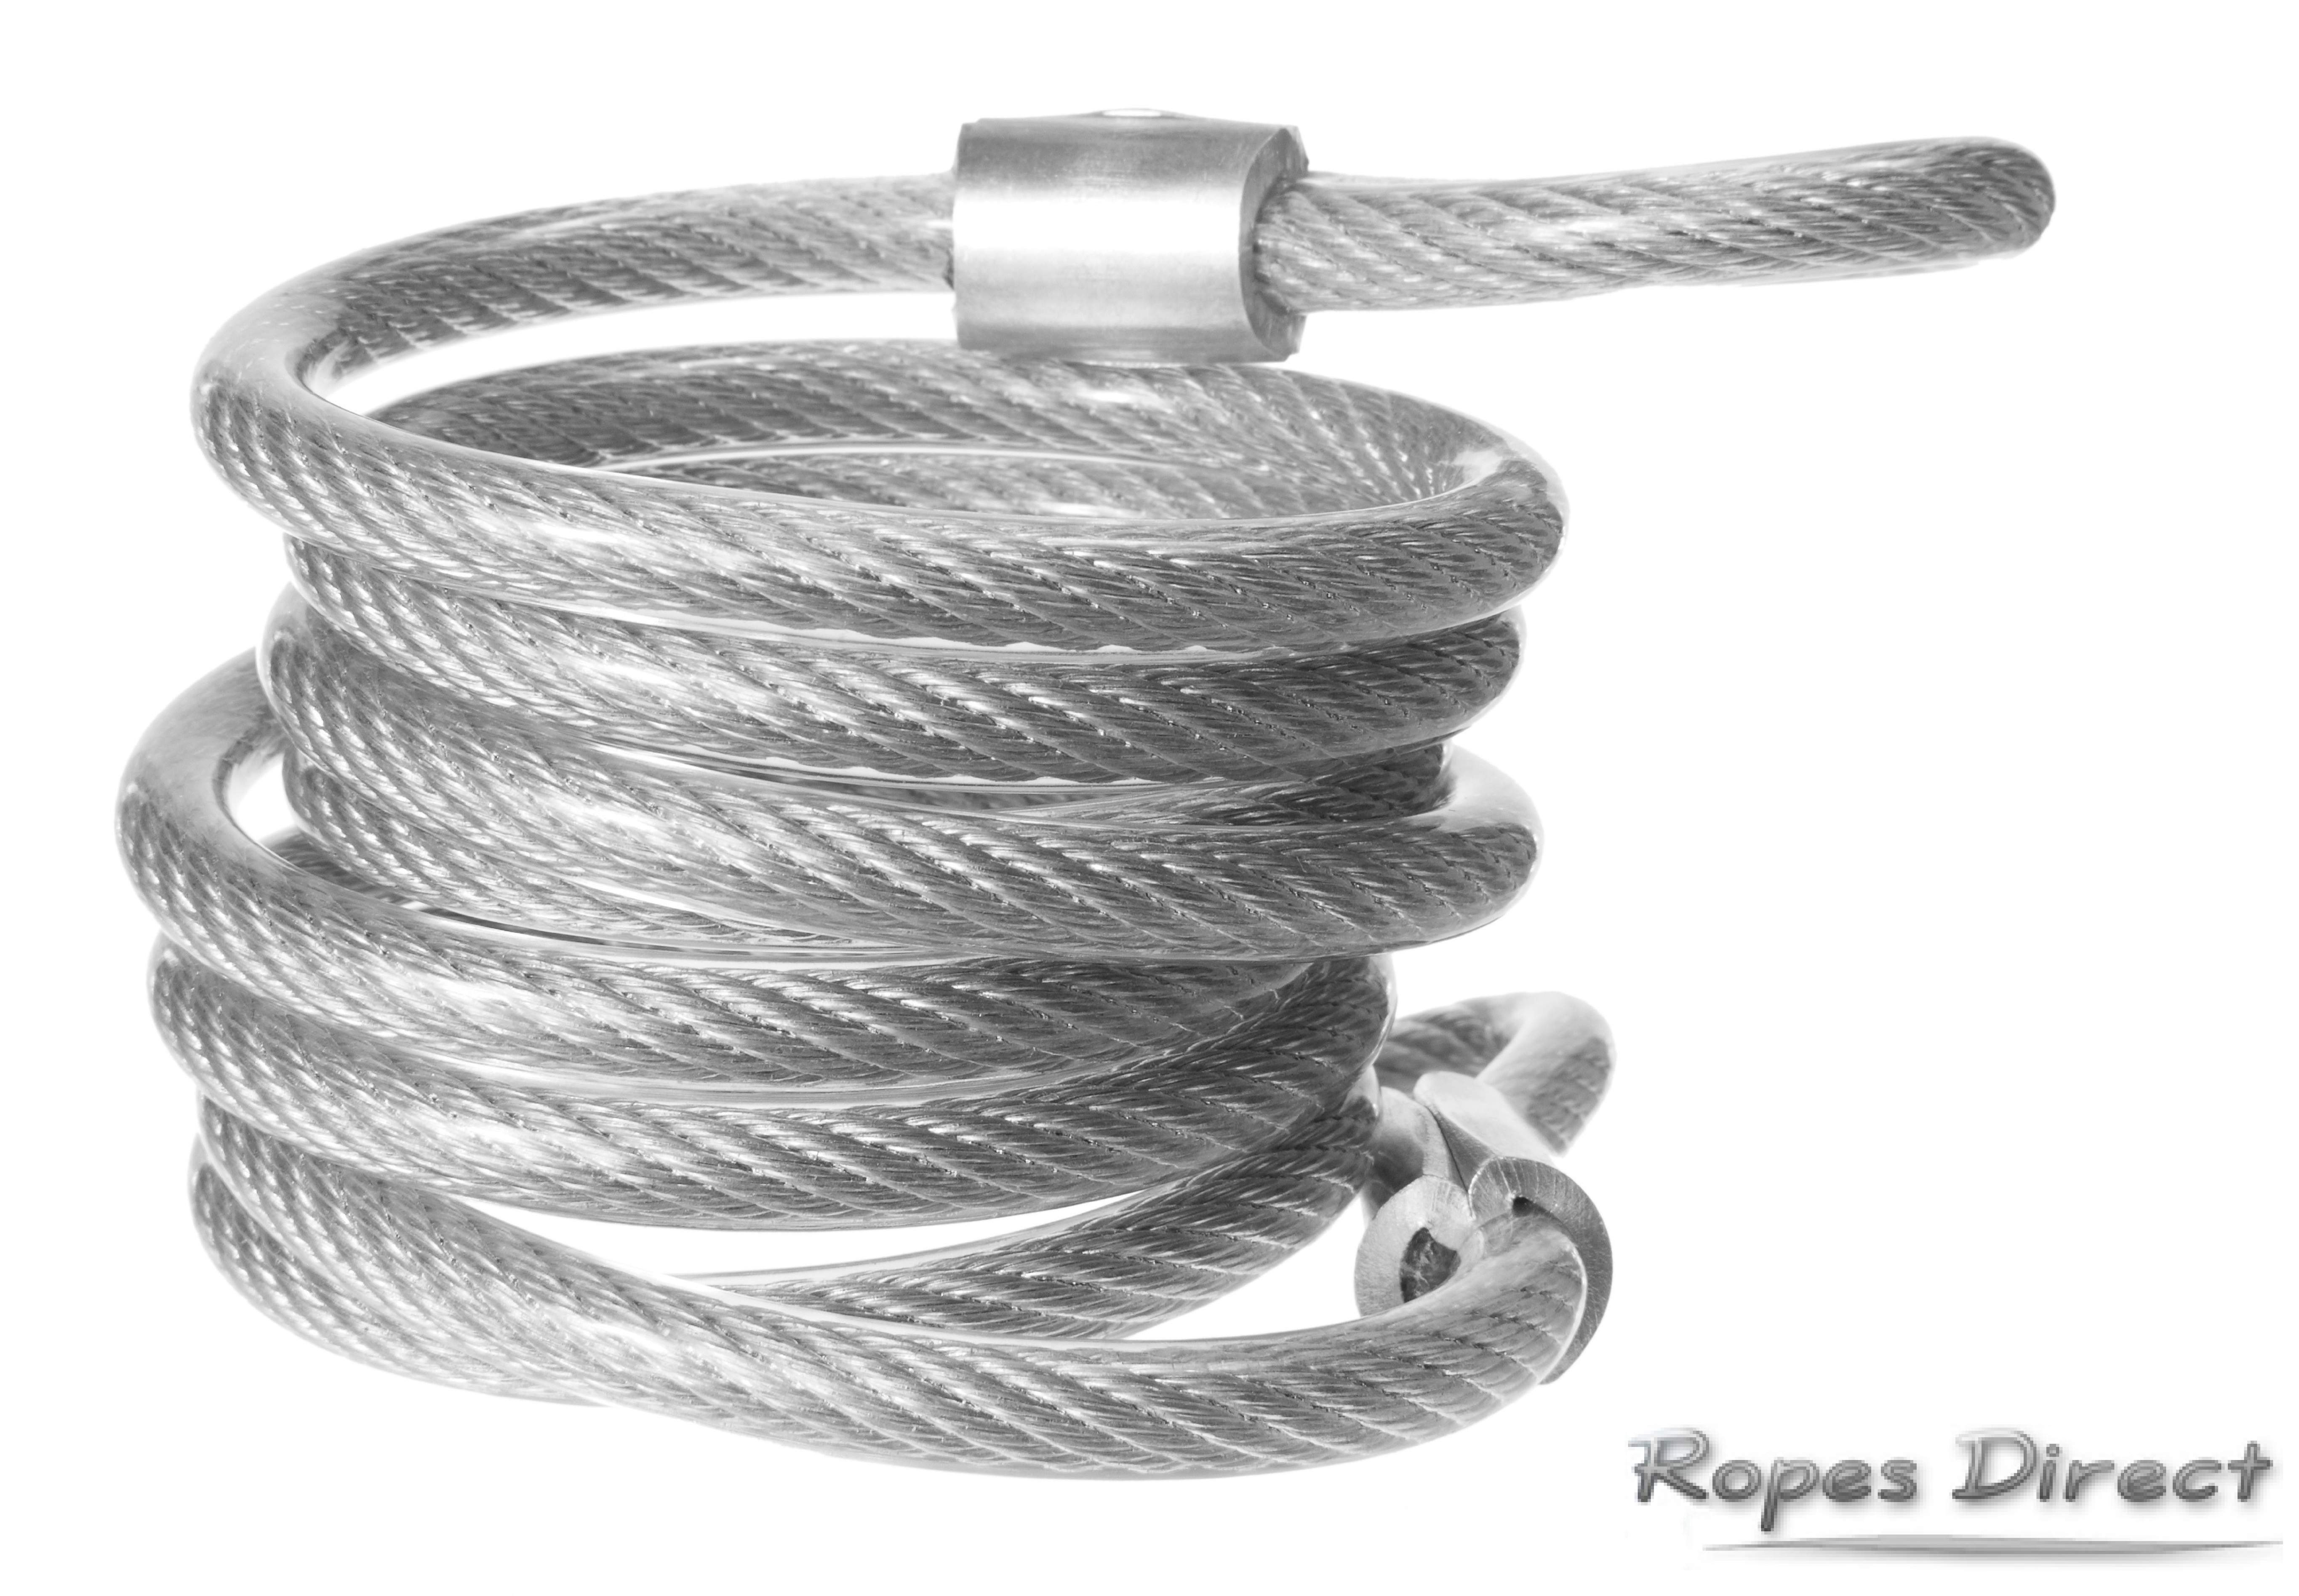 How to Cut Wire Rope  Simply to Follow Guide by Ropes Direct